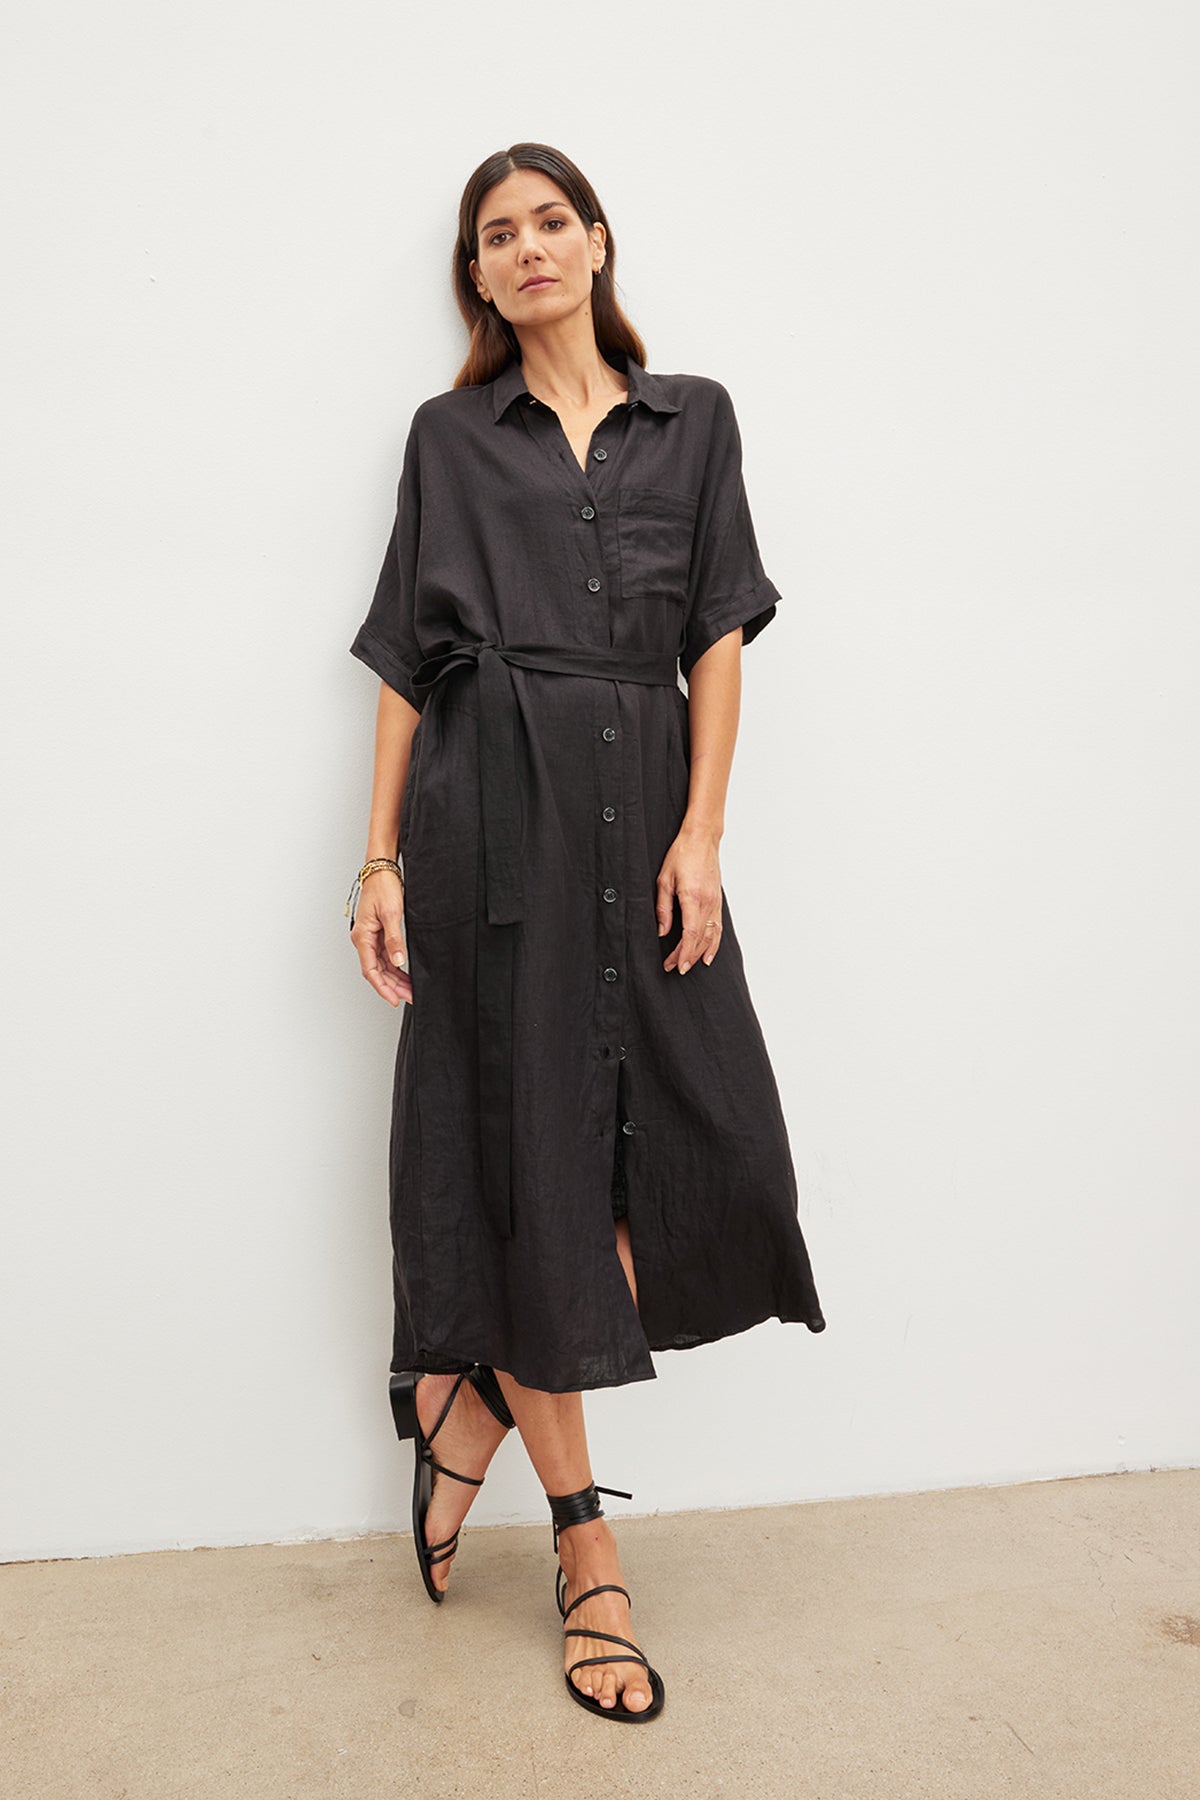 A woman stands against a white wall, wearing a black SANDRA LINEN BUTTON-UP DRESS by Velvet by Graham & Spencer with a detachable belt and black sandals.-35967717671105